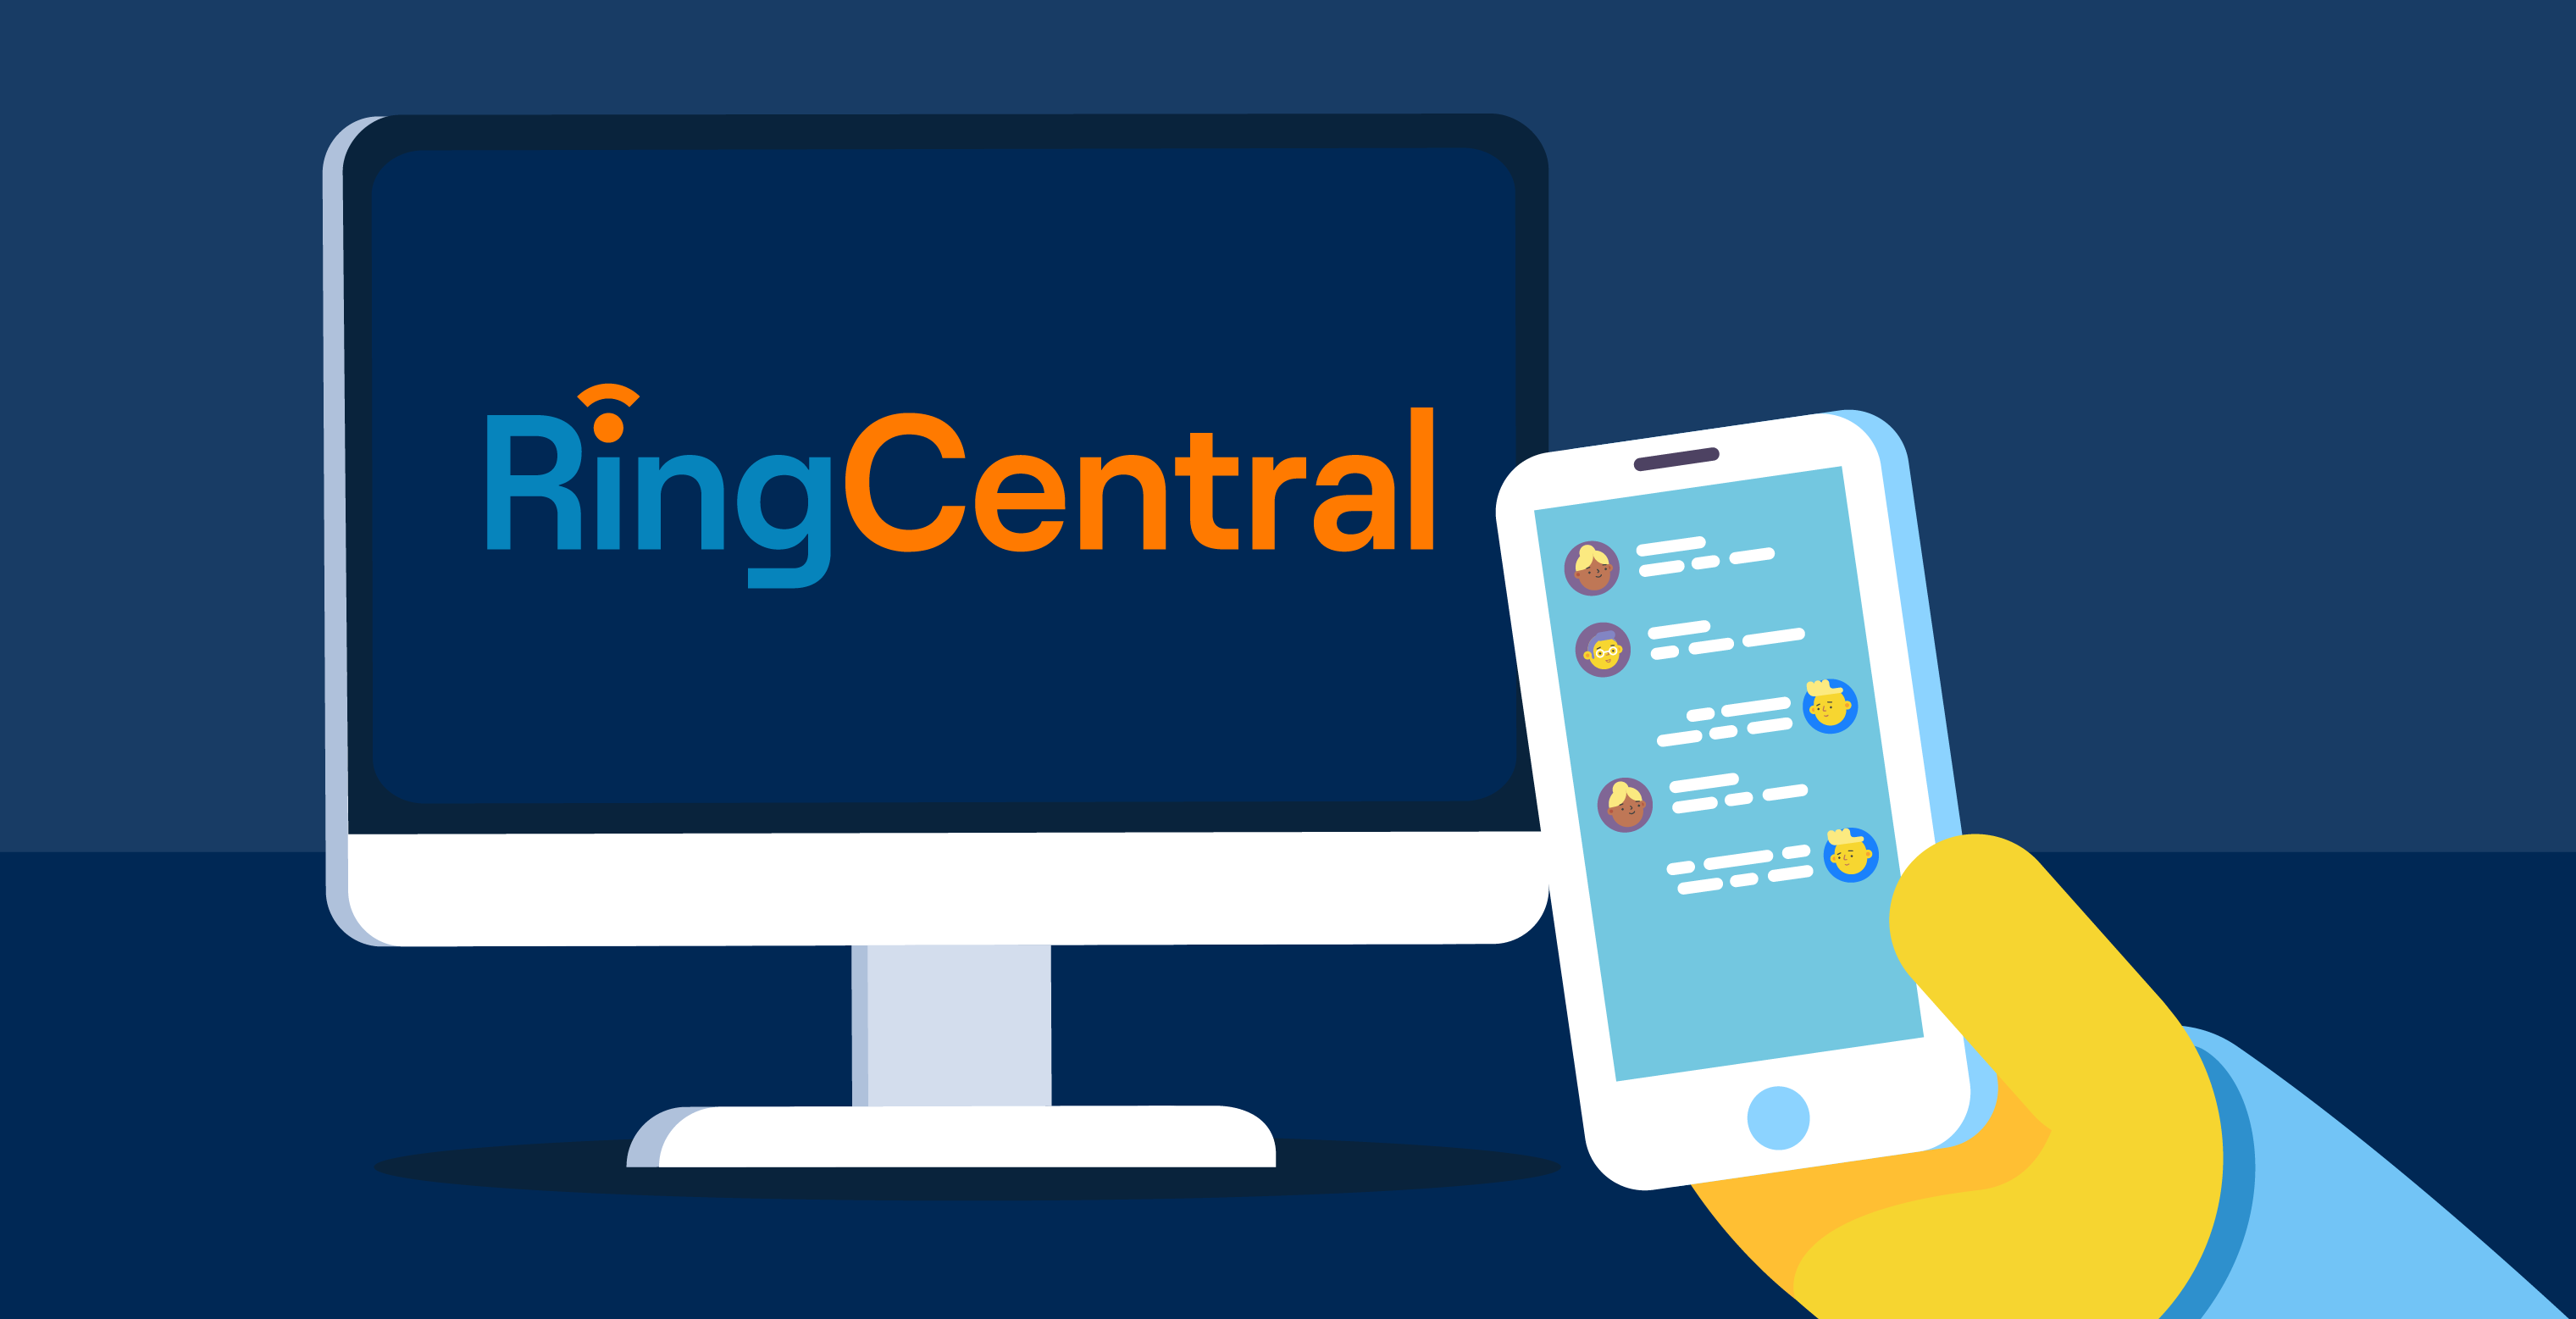 RingCentral (@ringcentral) • Instagram photos and videos